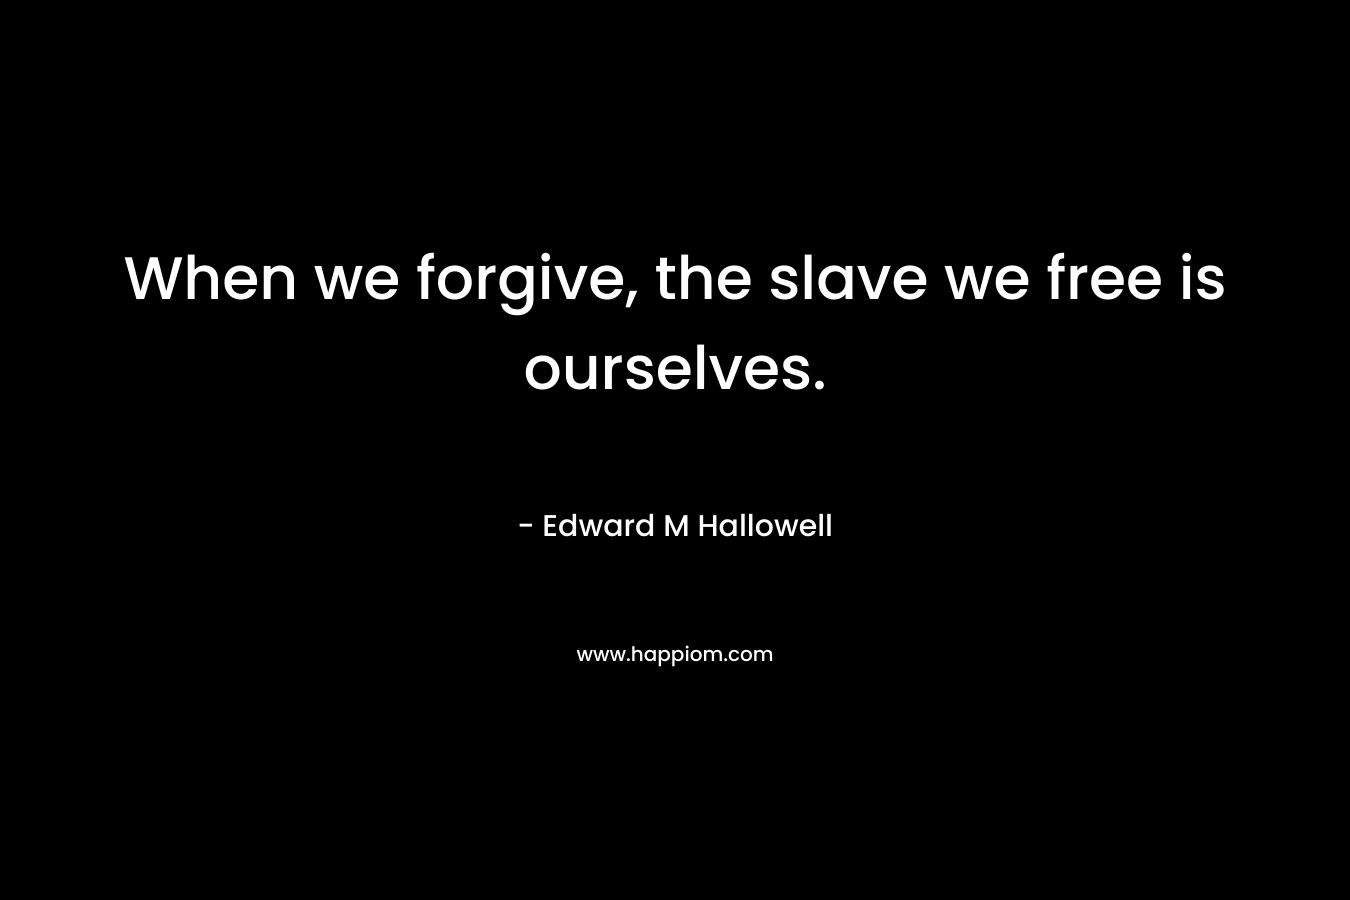 When we forgive, the slave we free is ourselves. – Edward M Hallowell